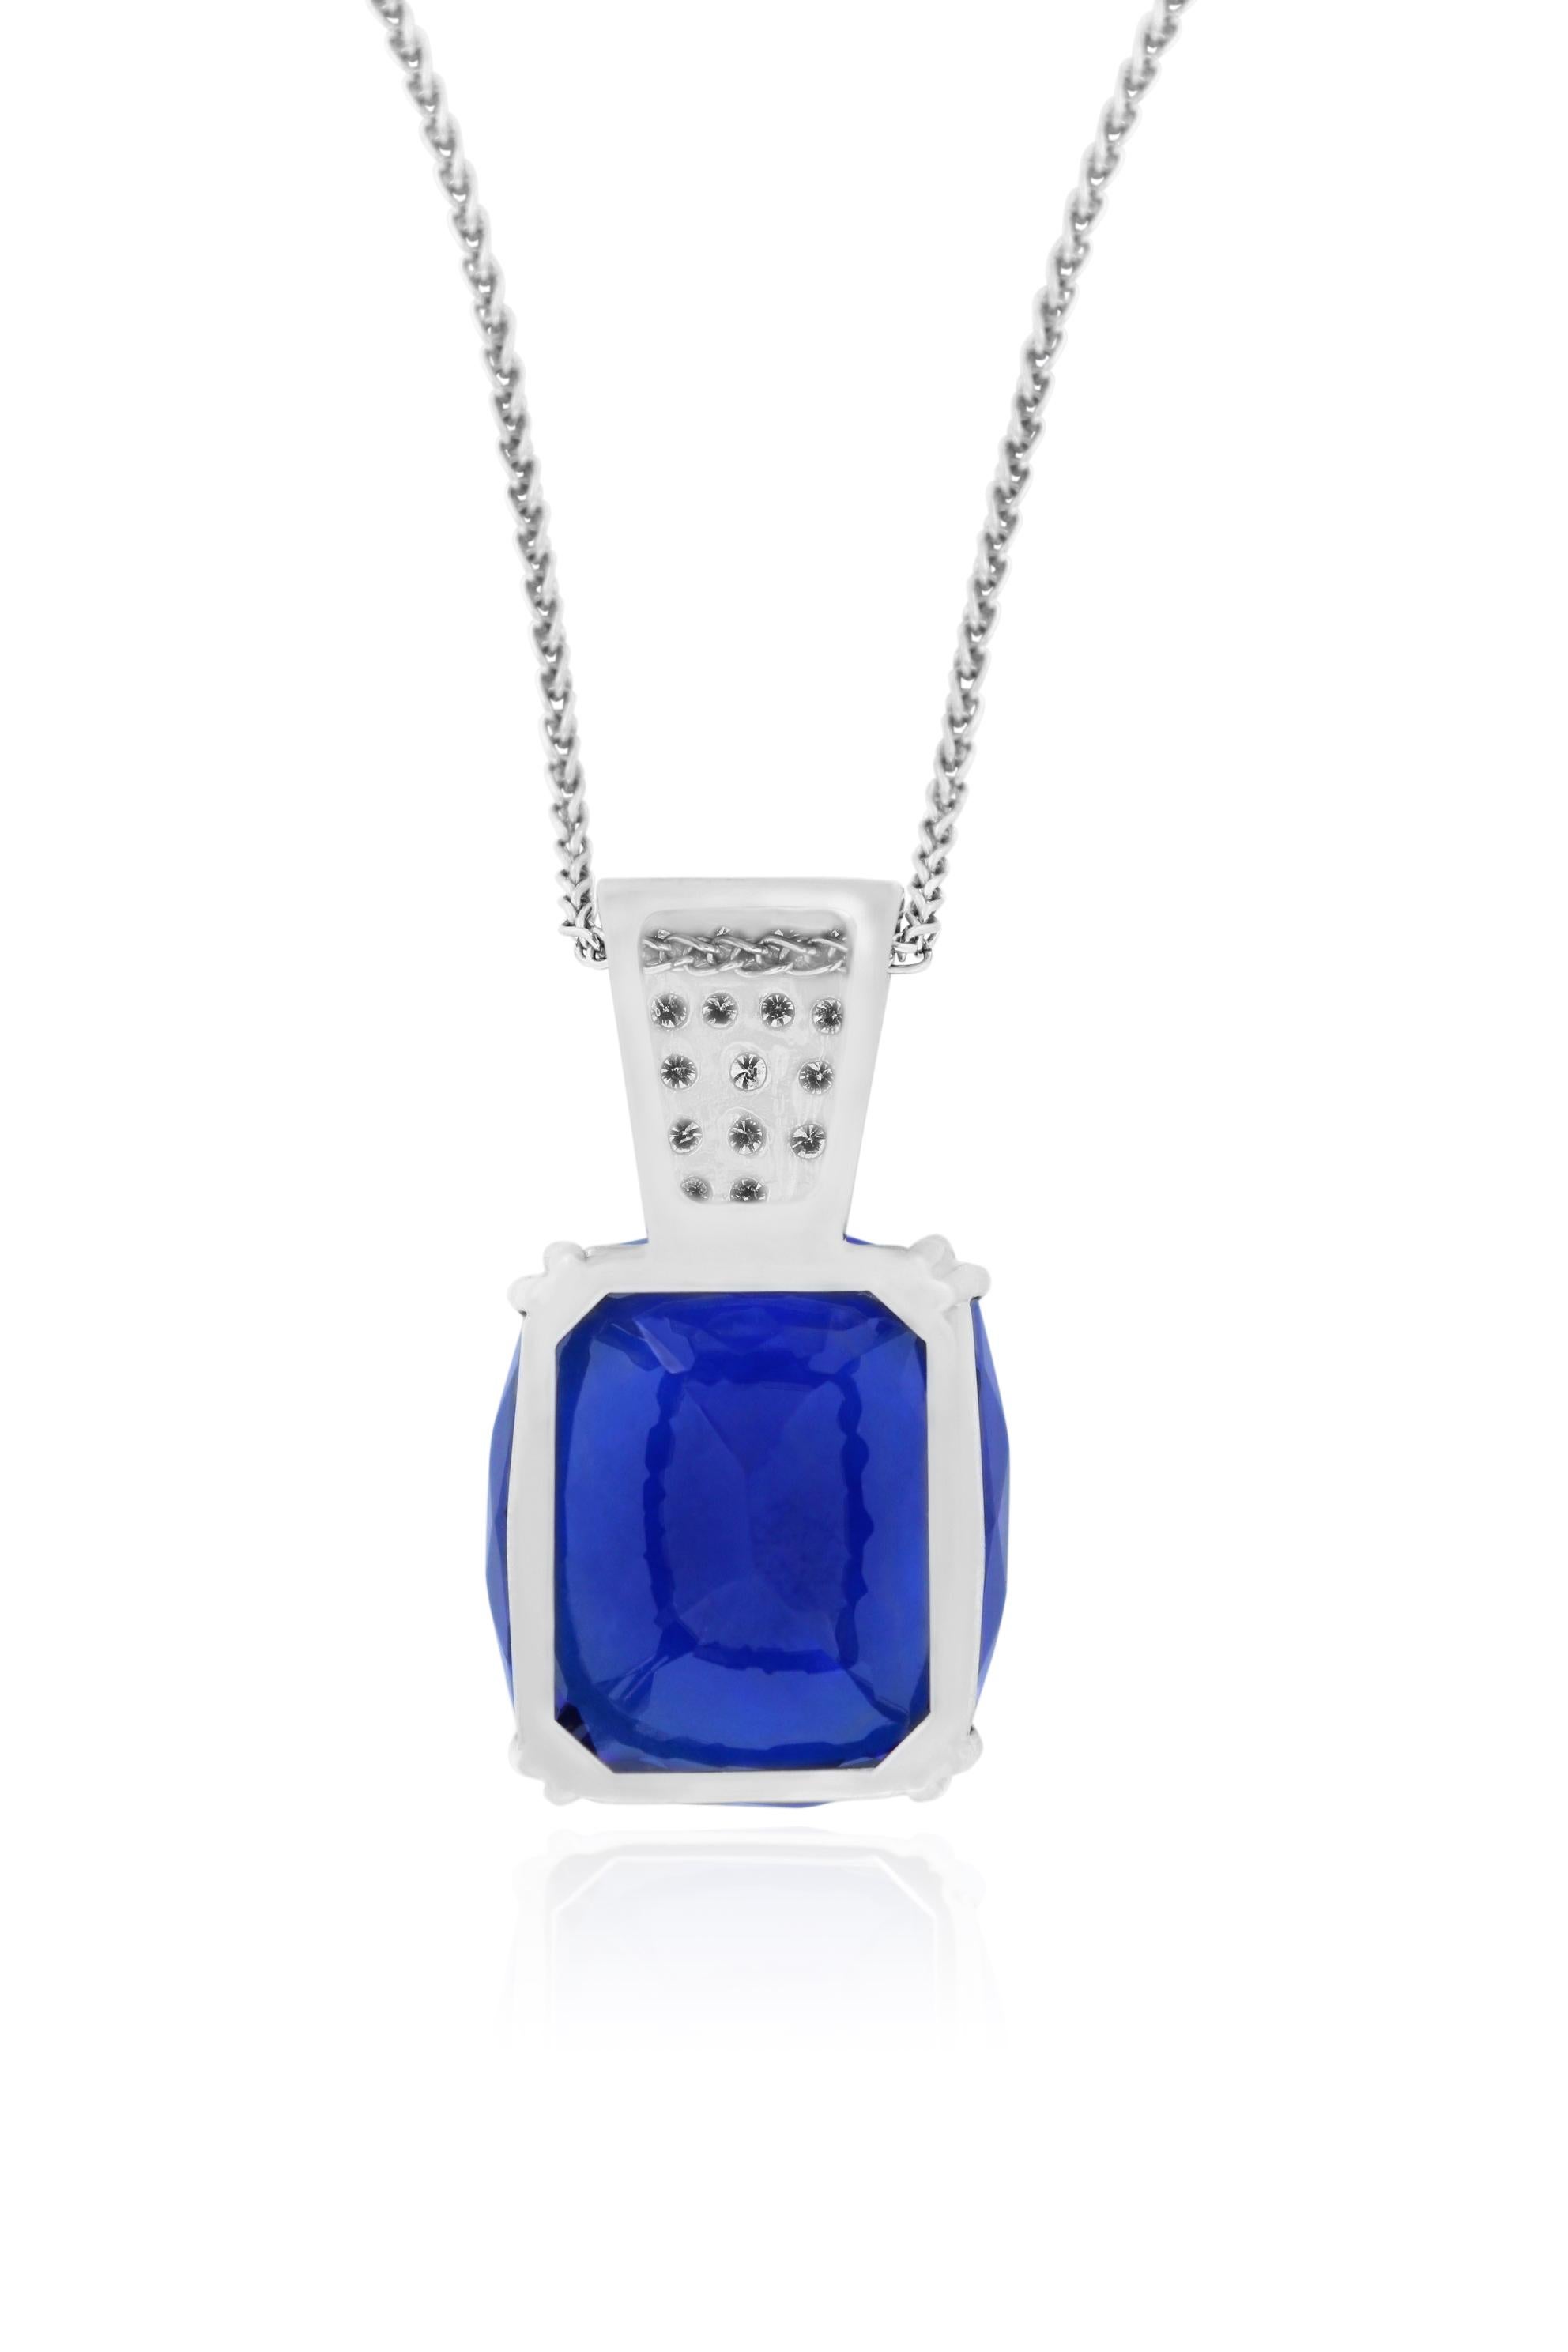 Material: 14k White Gold 
Center Stone Detail:  1 Cushion Cut Tanzanite at 53.15 Carats - AAA Cobalt Blue
Mounting Stone Details: 17 Brilliant Round White Diamonds at 0.61 Carats - Clarity: SI / Color
Chain Length:  18 Inches

Fine one-of-a-kind